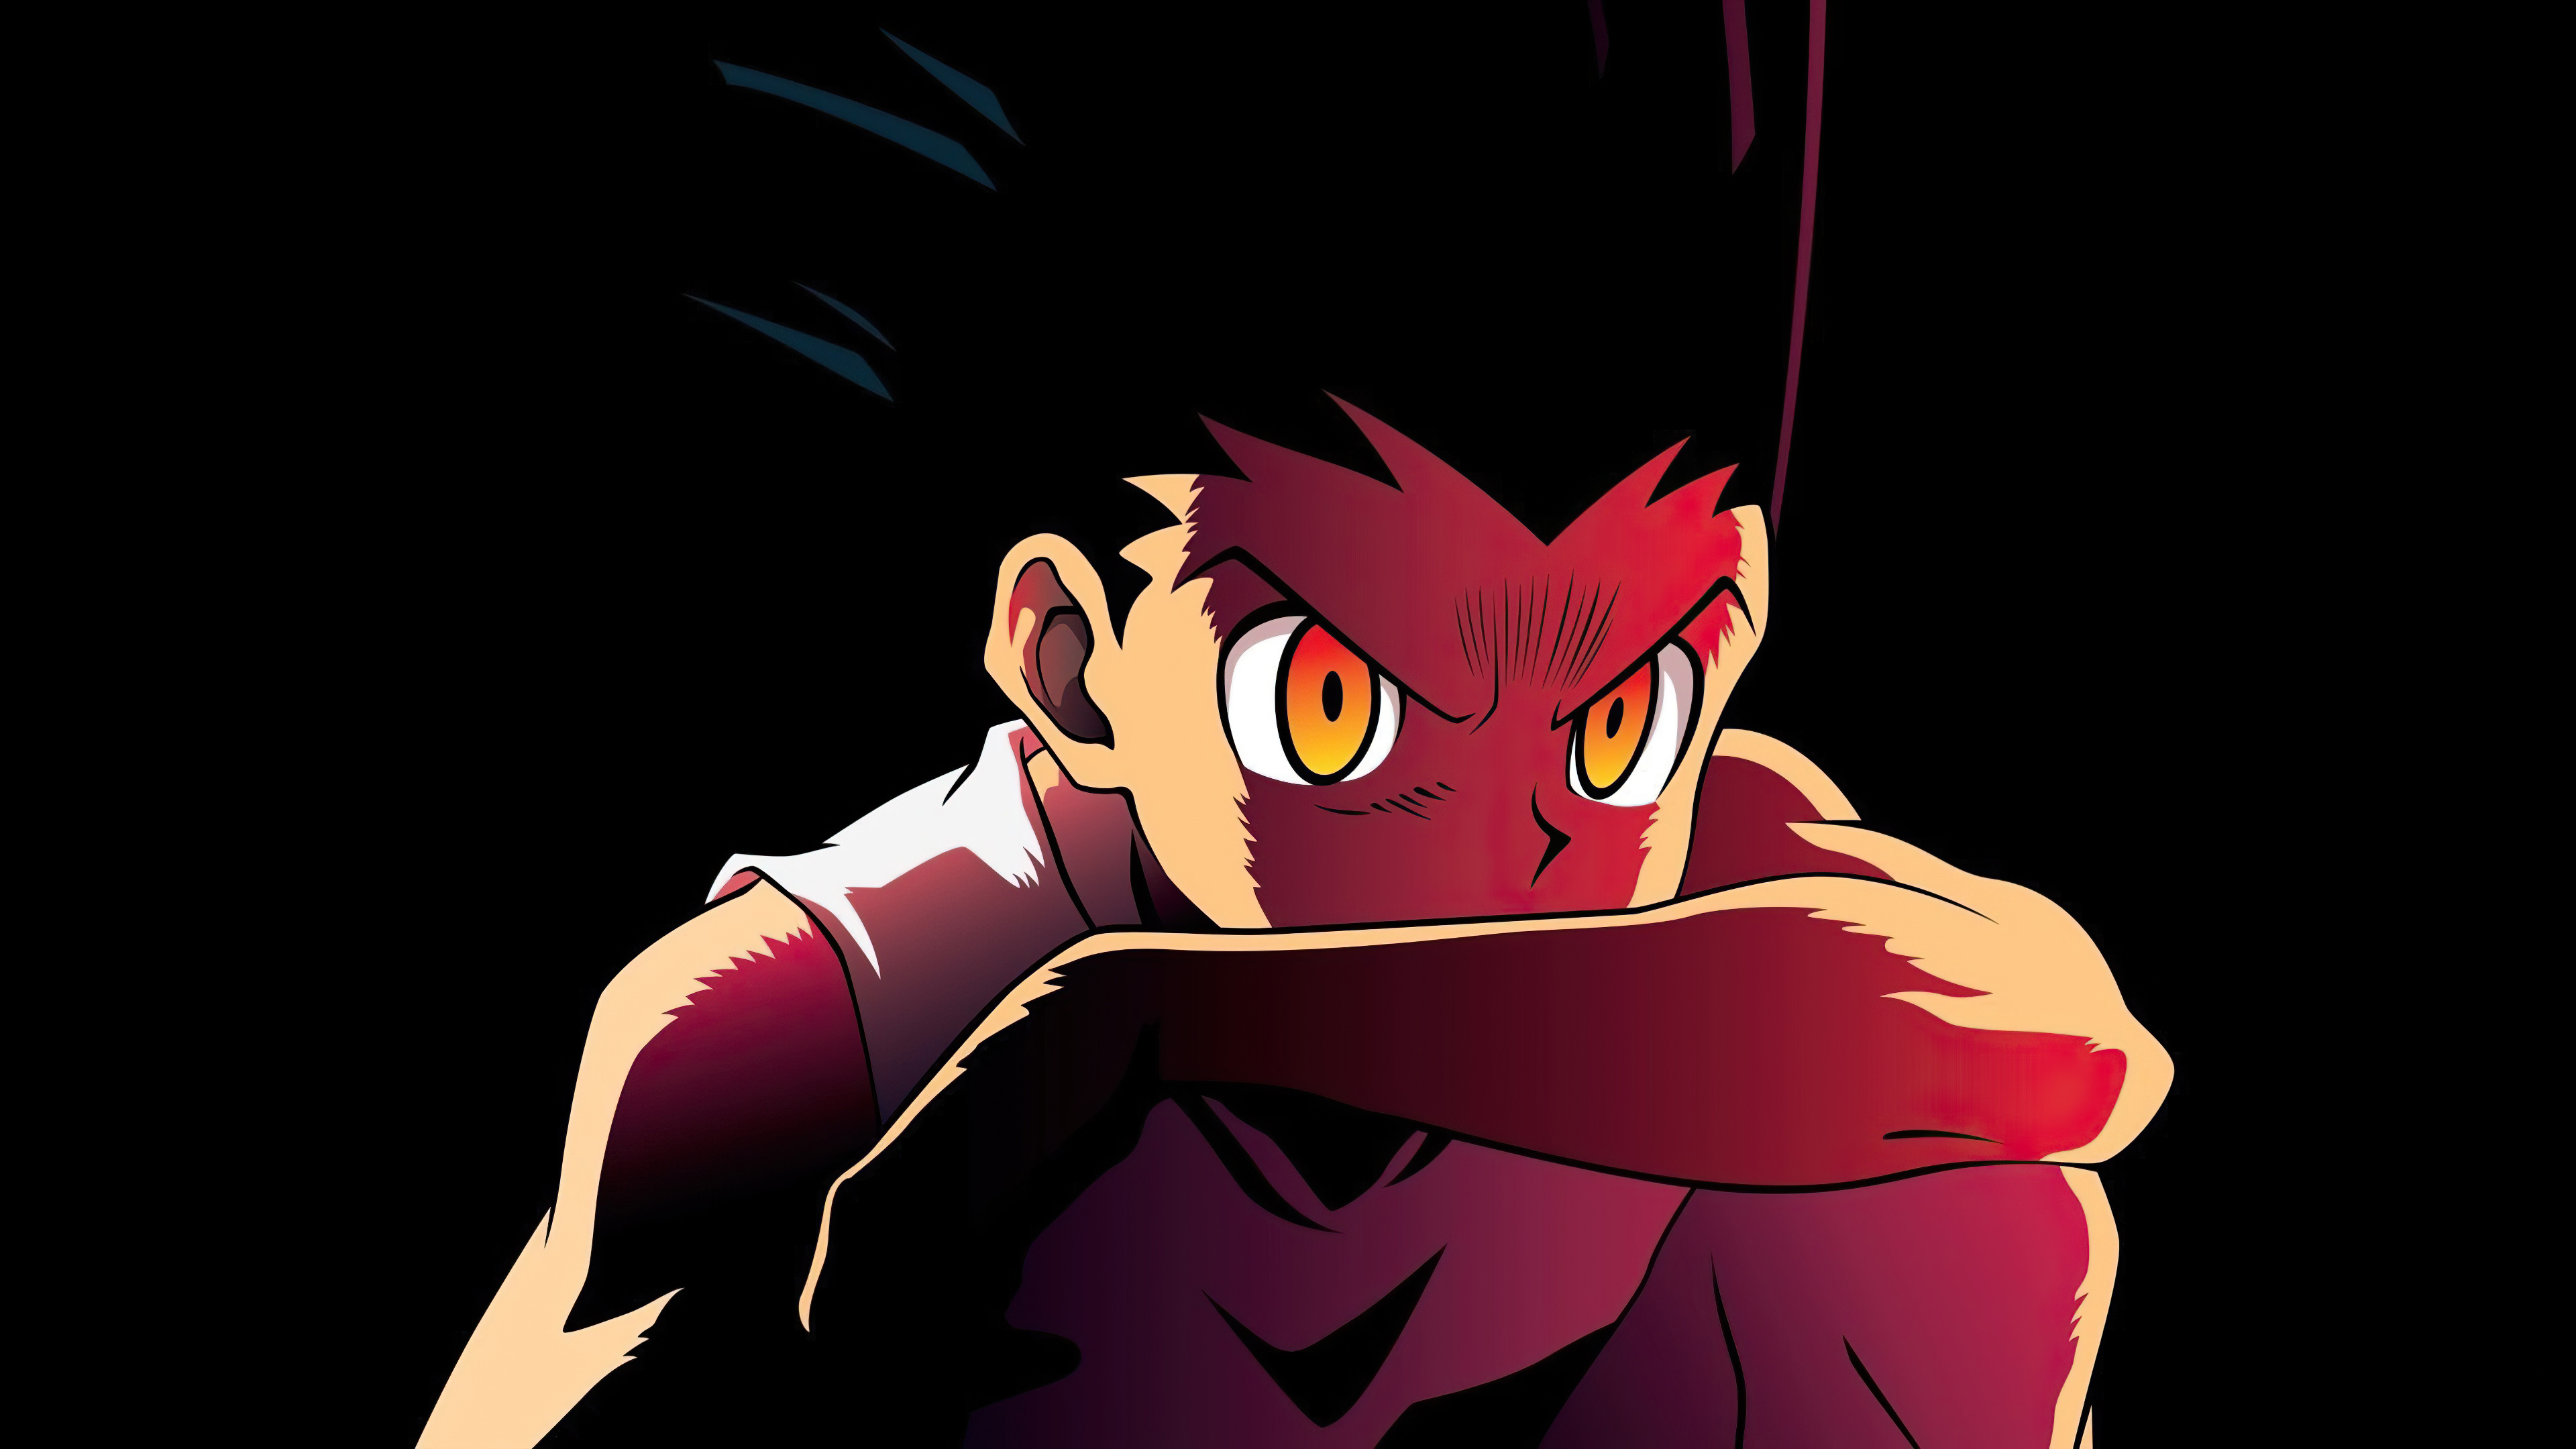 Gon Freecss: The son of the famous Hunter Ging Freecss, A Rookie Hunter, A young boy with large eyes. 3840x2160 4K Wallpaper.